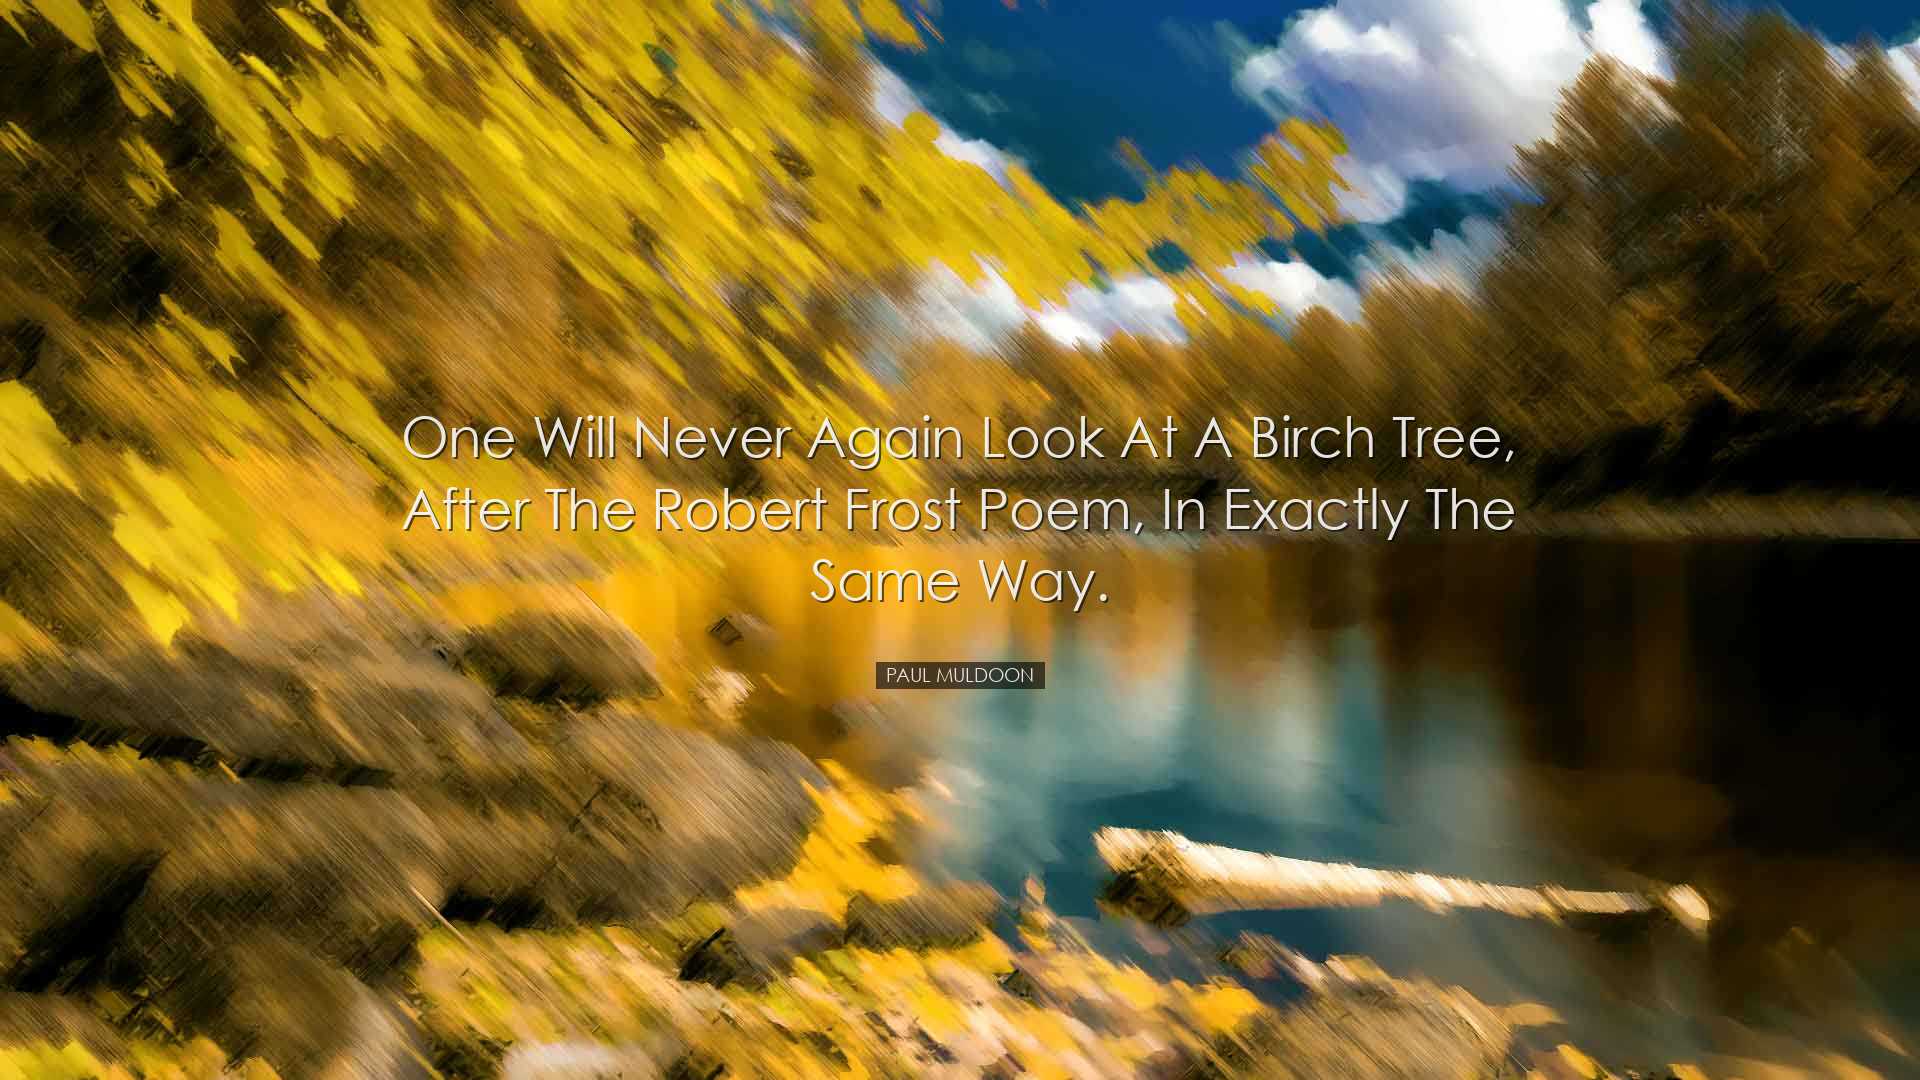 One will never again look at a birch tree, after the Robert Frost